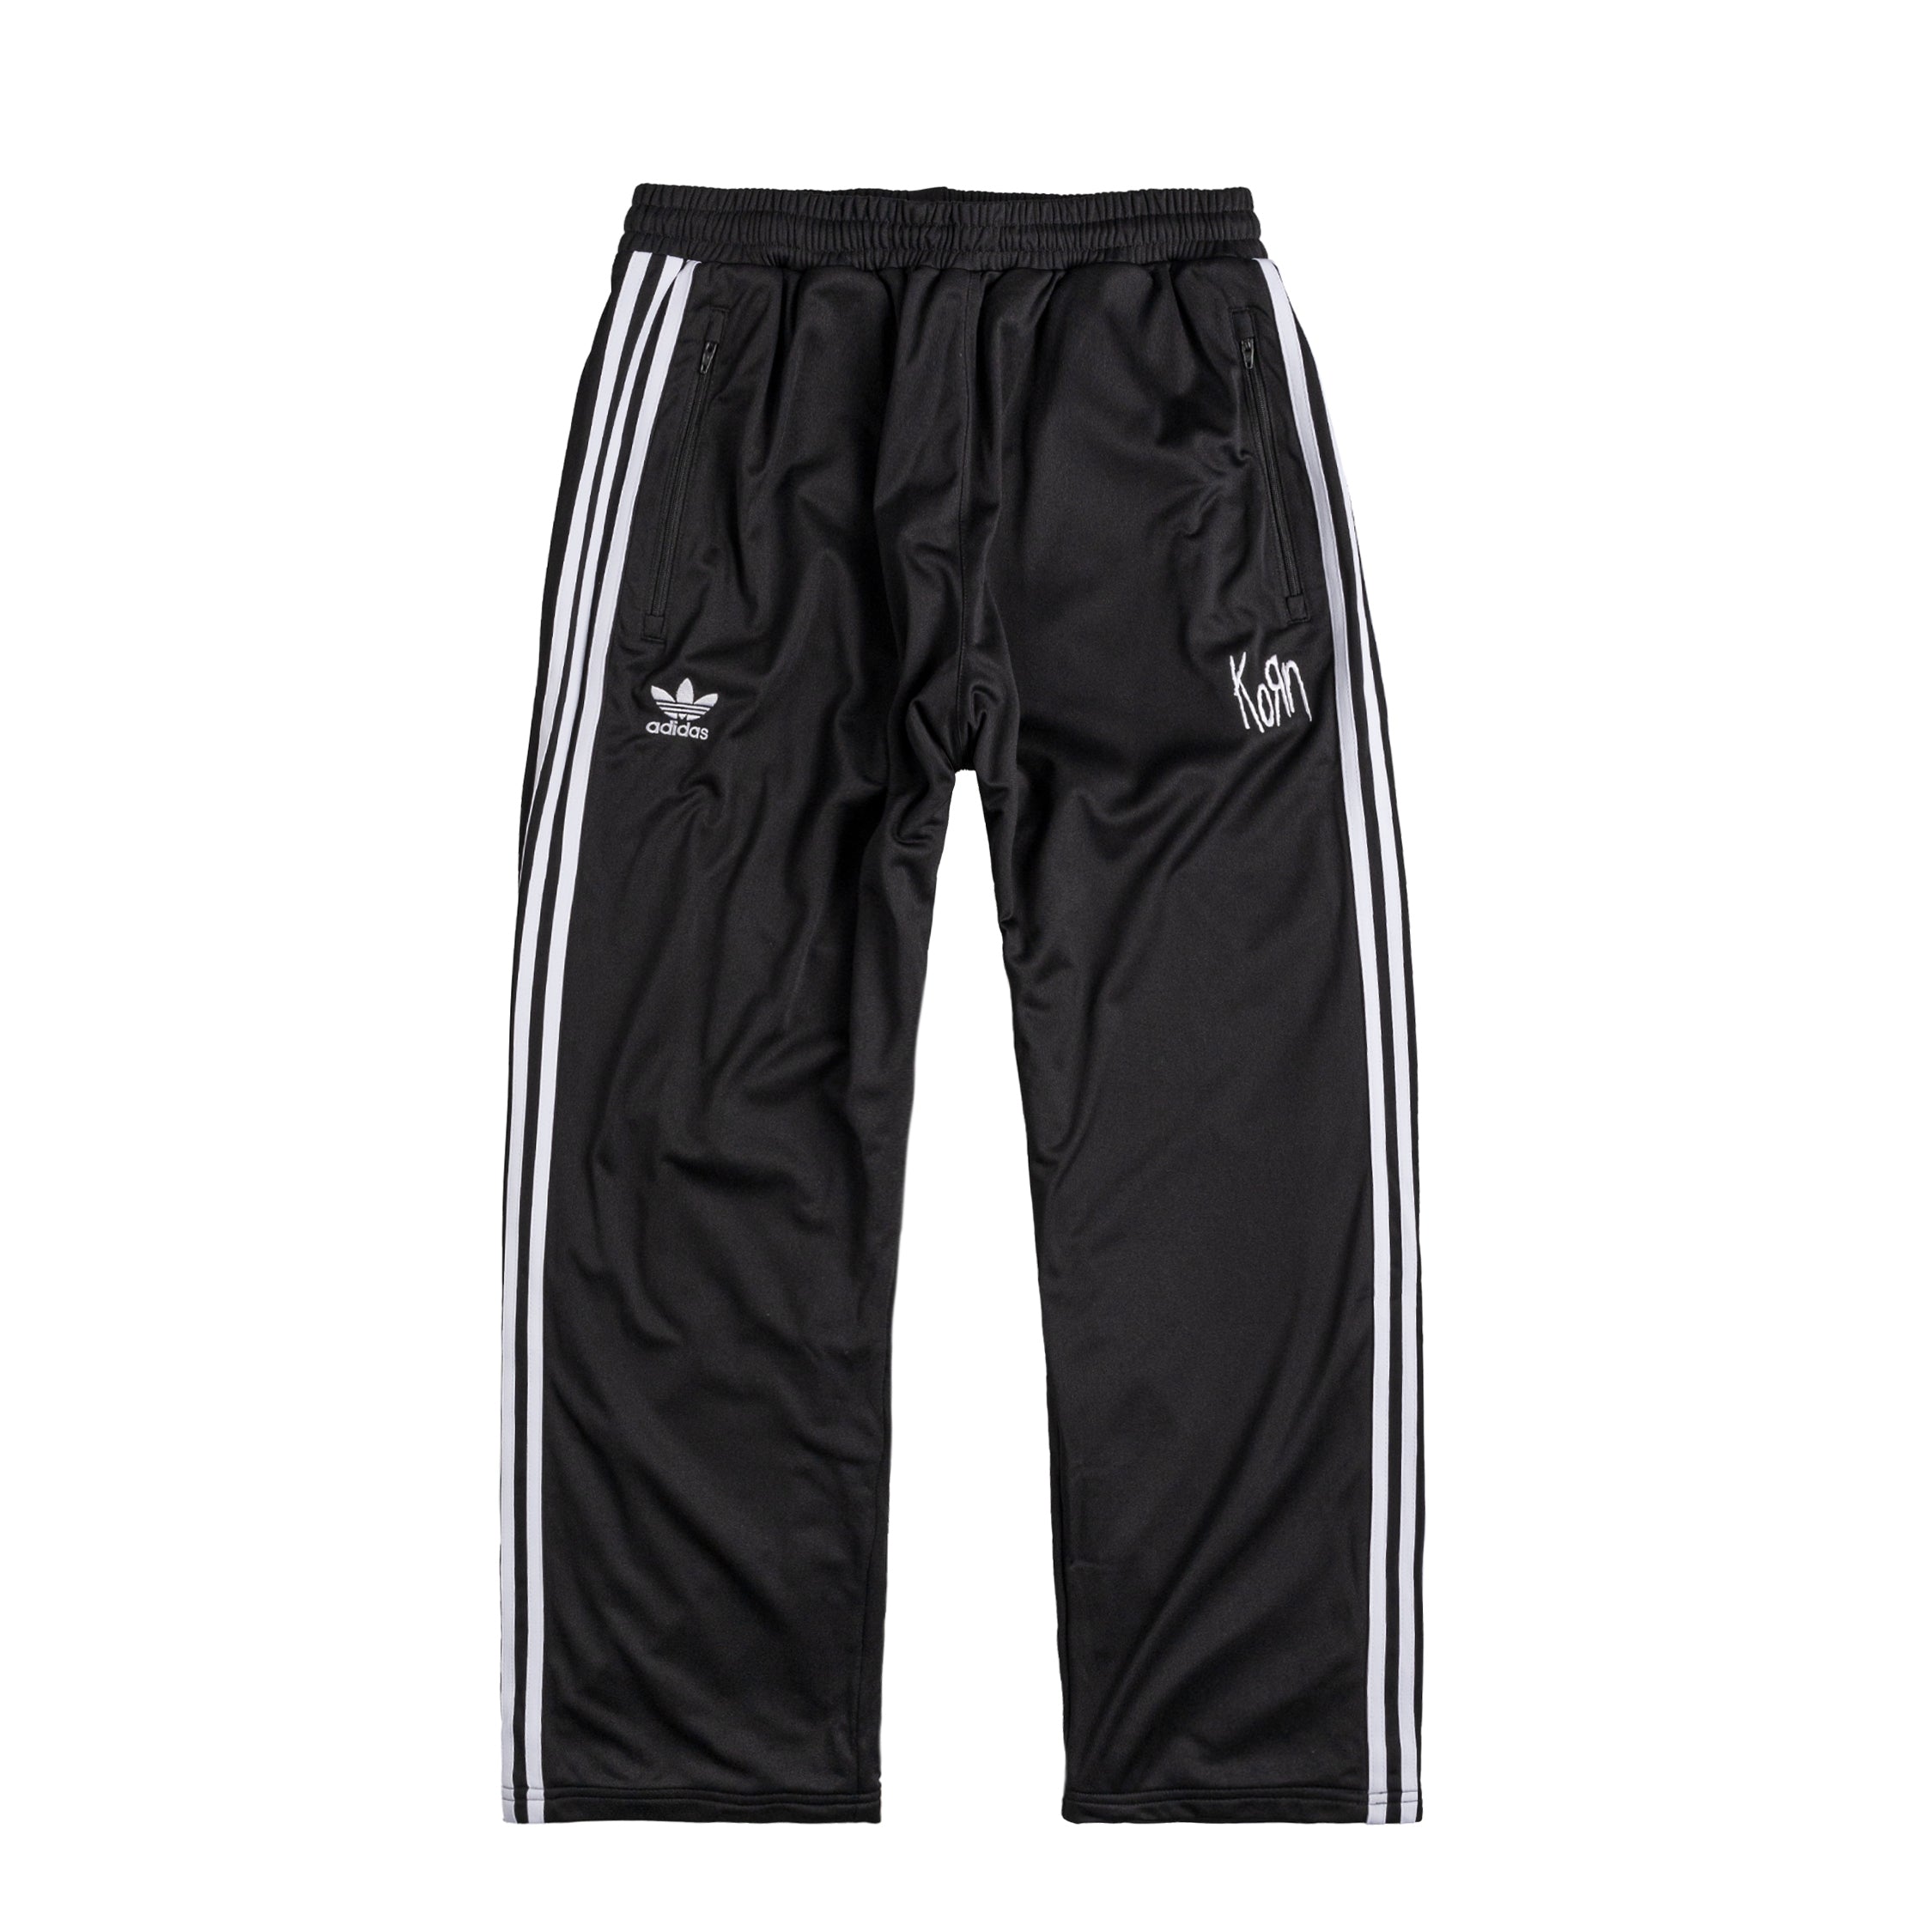 Adidas x KoRn Track Pant » Buy online now!